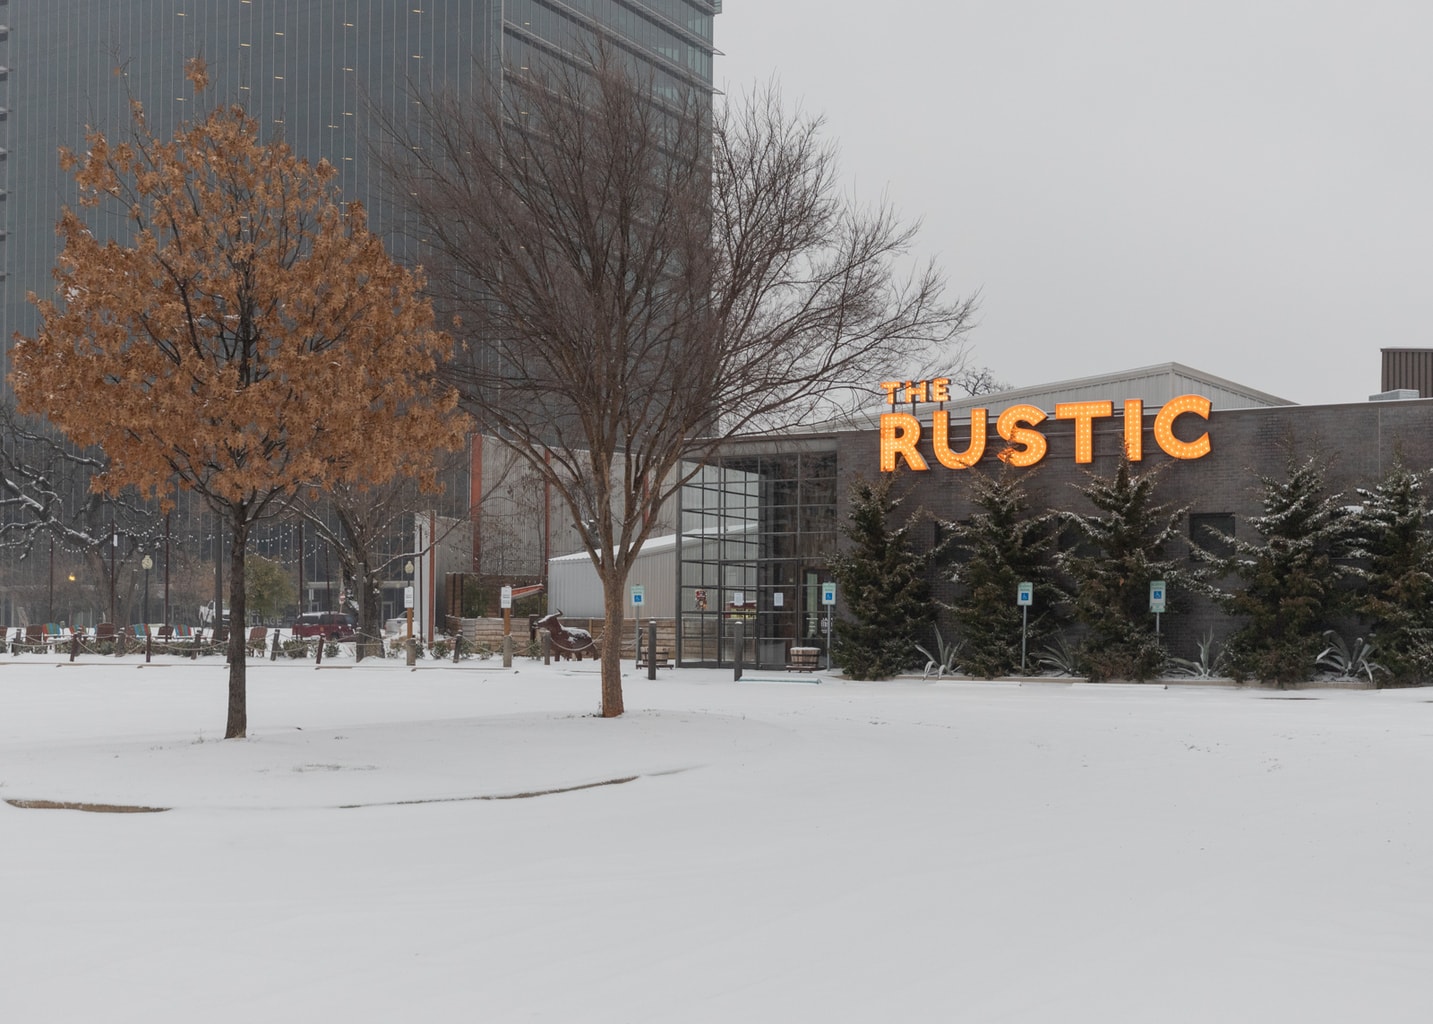 The Rustic covered with snow after the Dallas winter storm